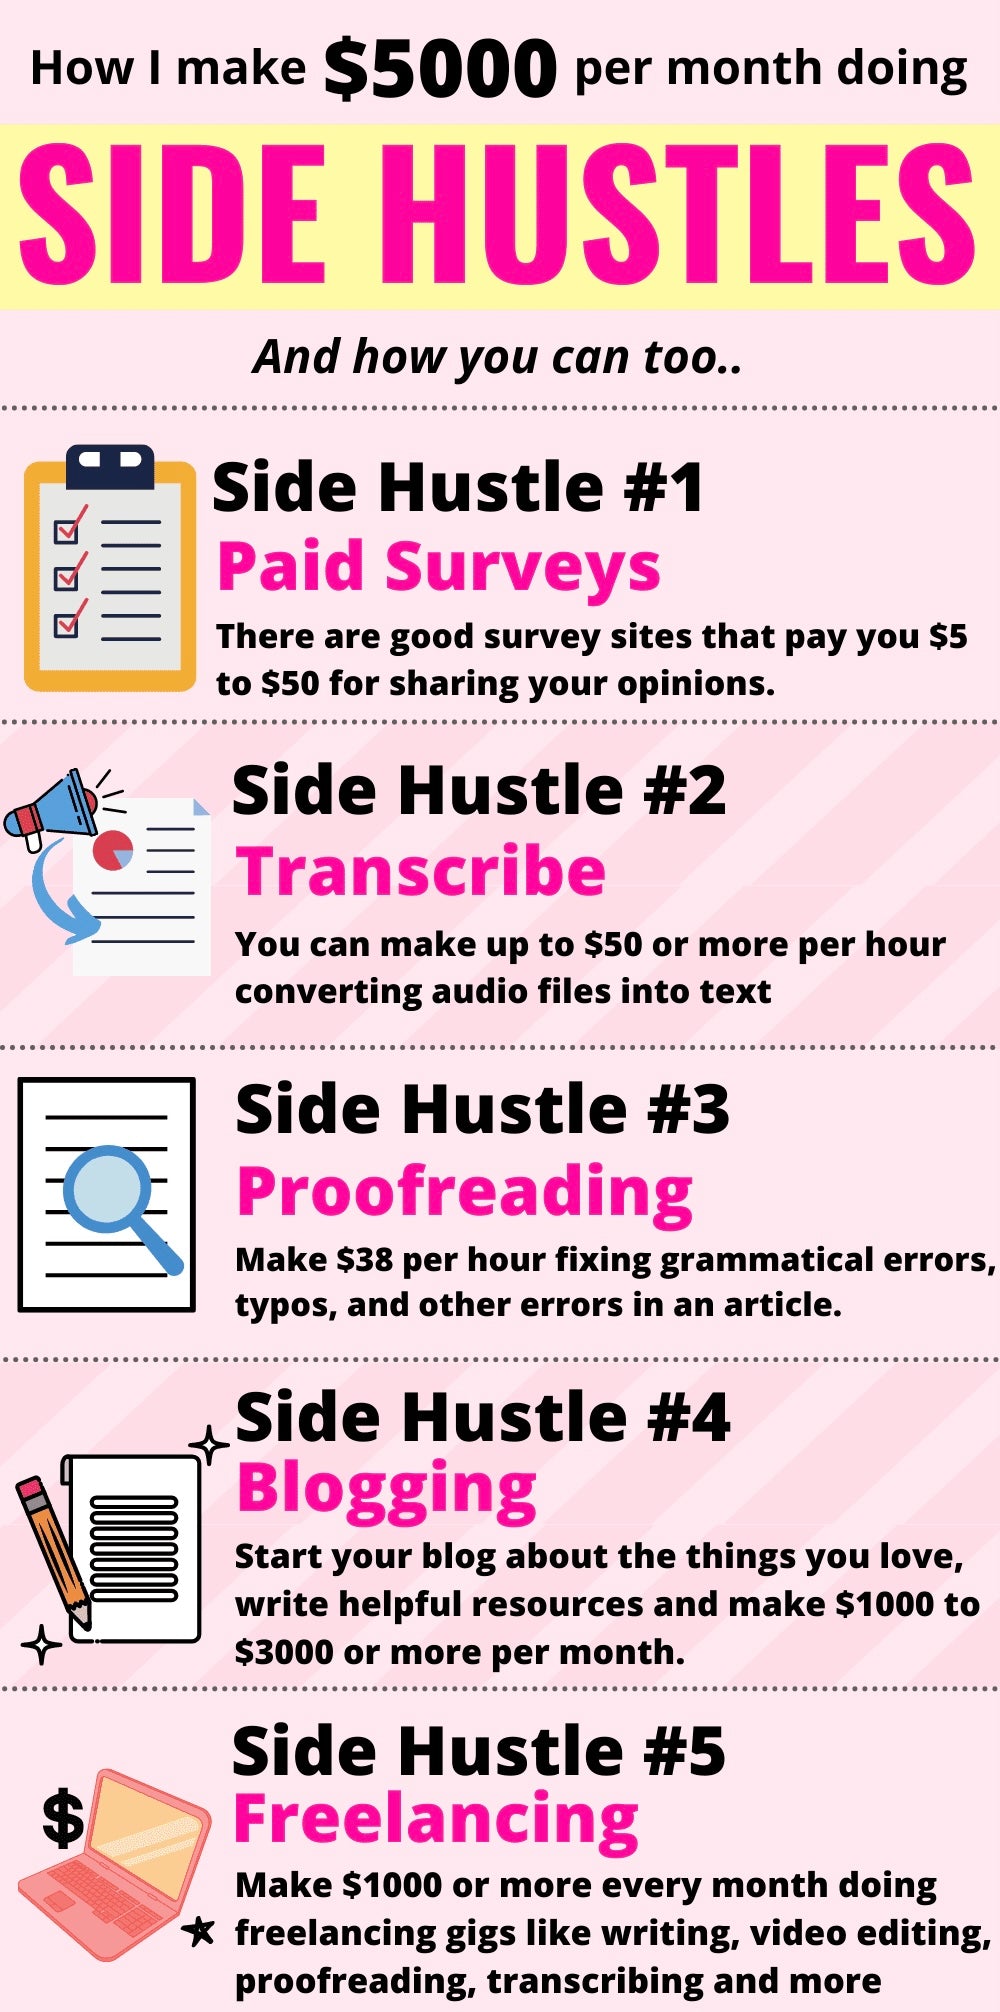 Side Hustles: Turn your Spare Time into $1,000 or more Monthly 💰